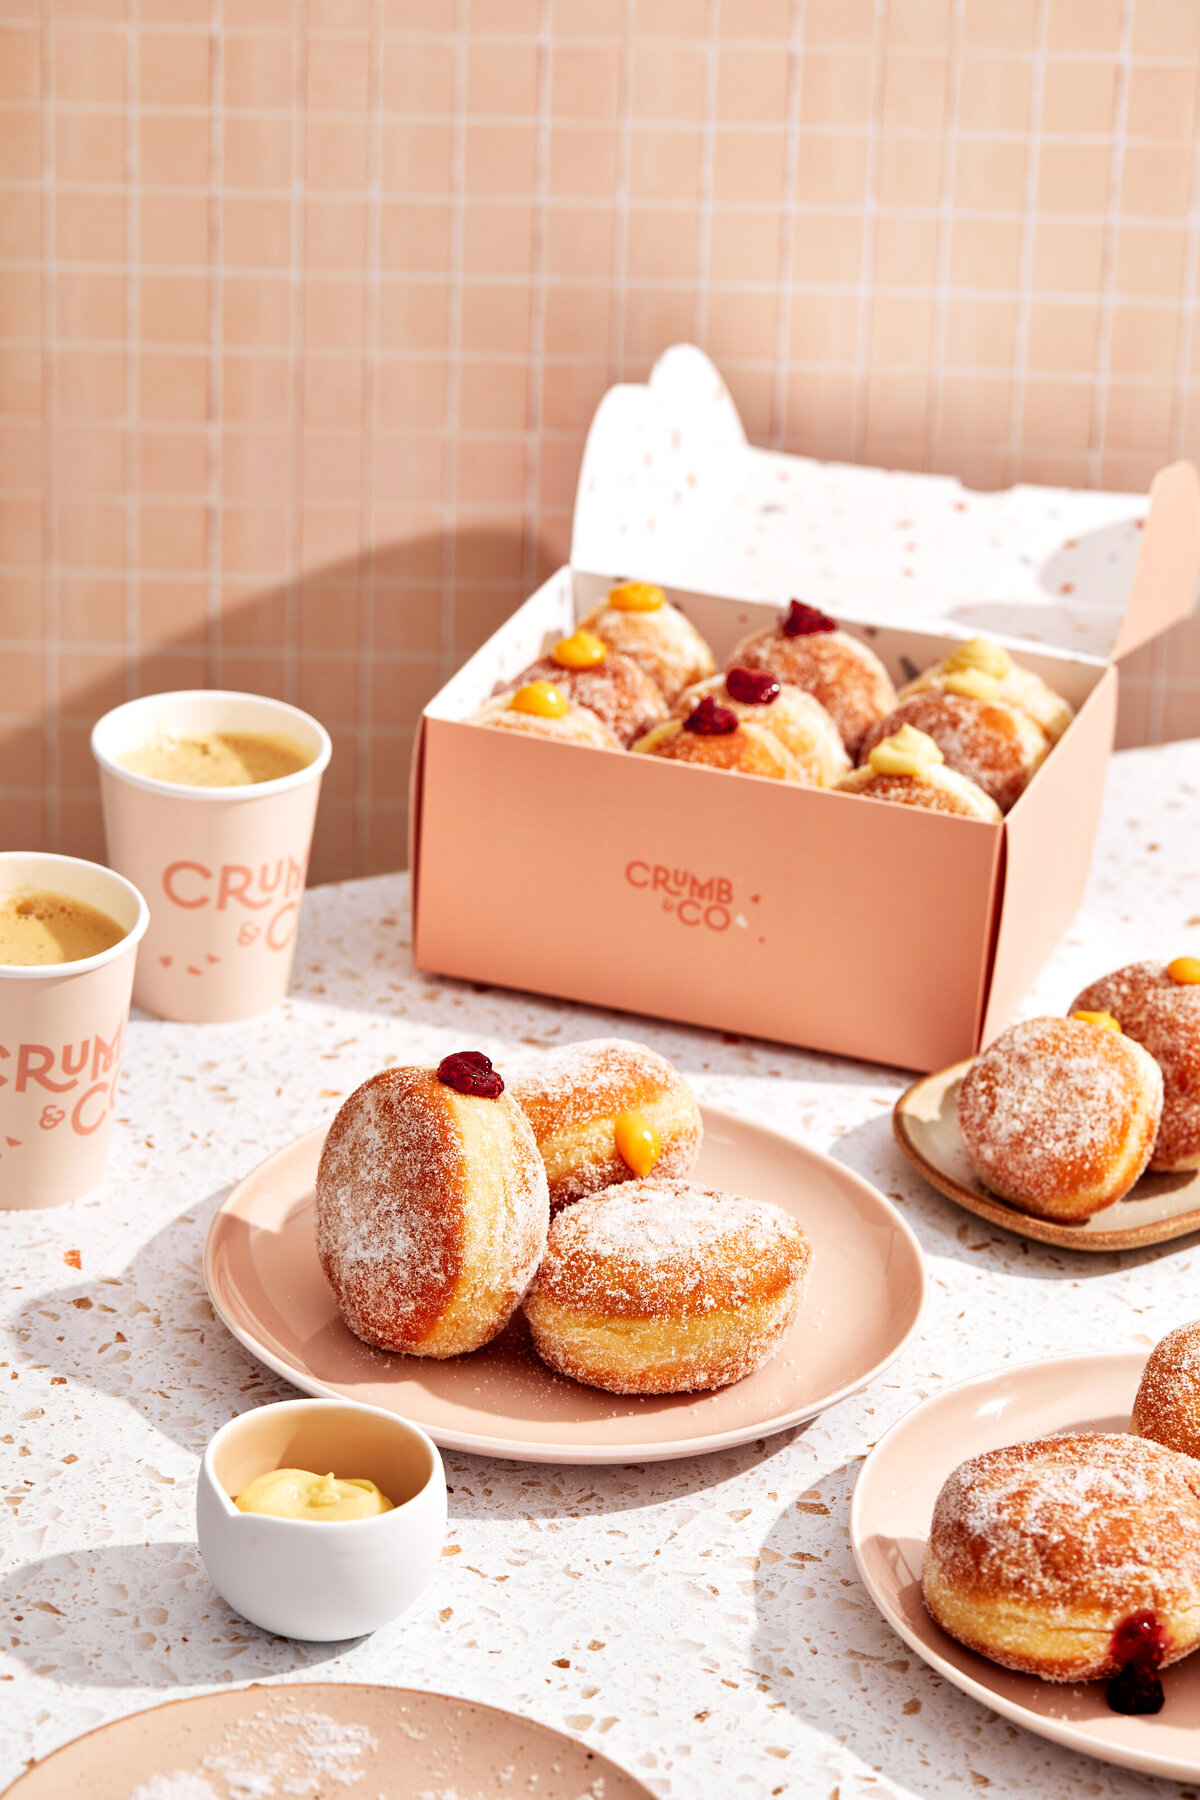 Cafe with a plate of donuts and jam donuts inside a takeaway box.